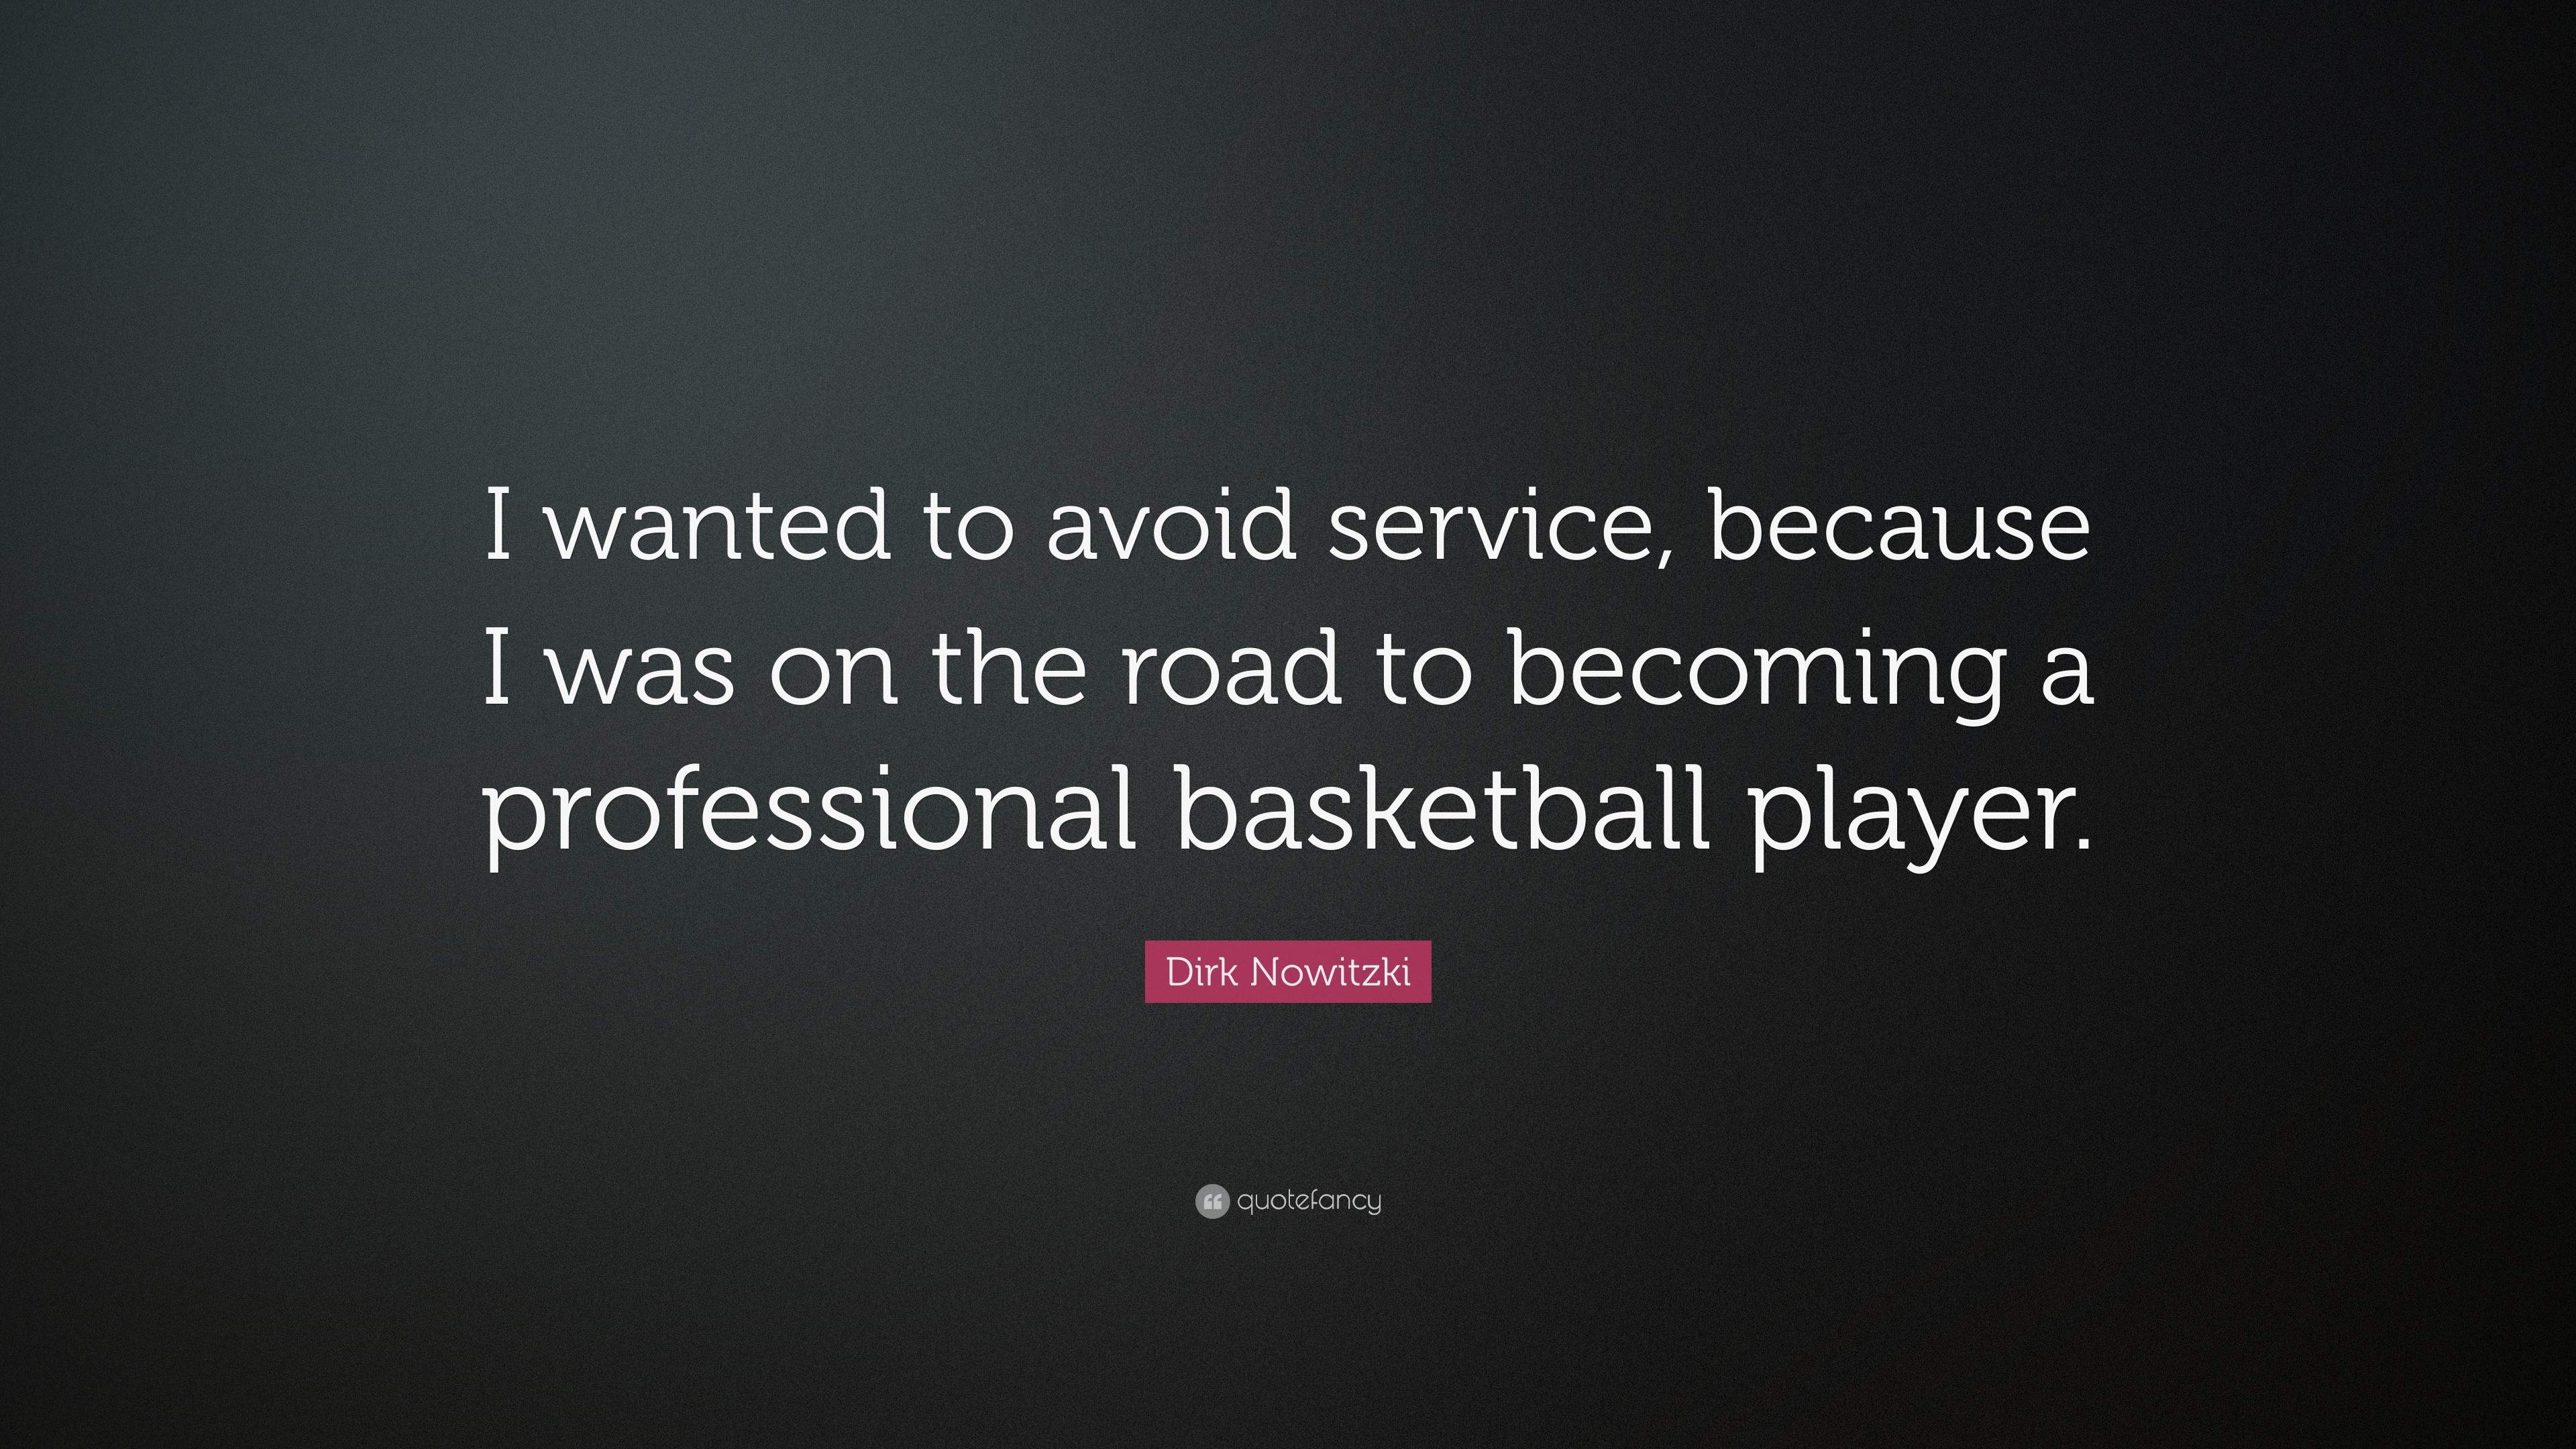 Dirk Nowitzki Quote: "I wanted to avoid service, because I was on the ...